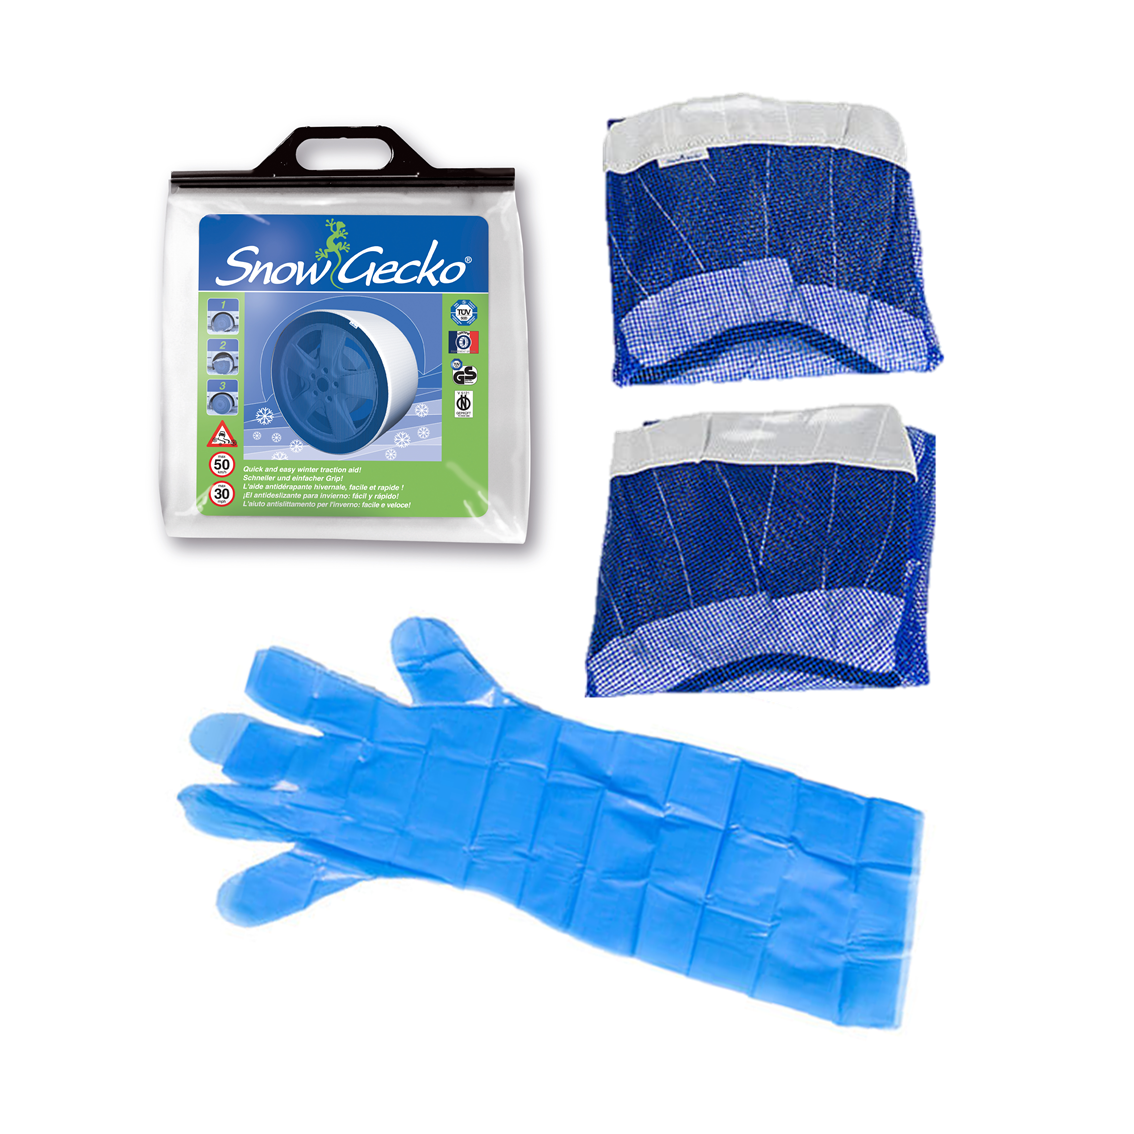 Product packaging content for SnowGecko products contains two SnowGecko tire socks and a pair of gloves 